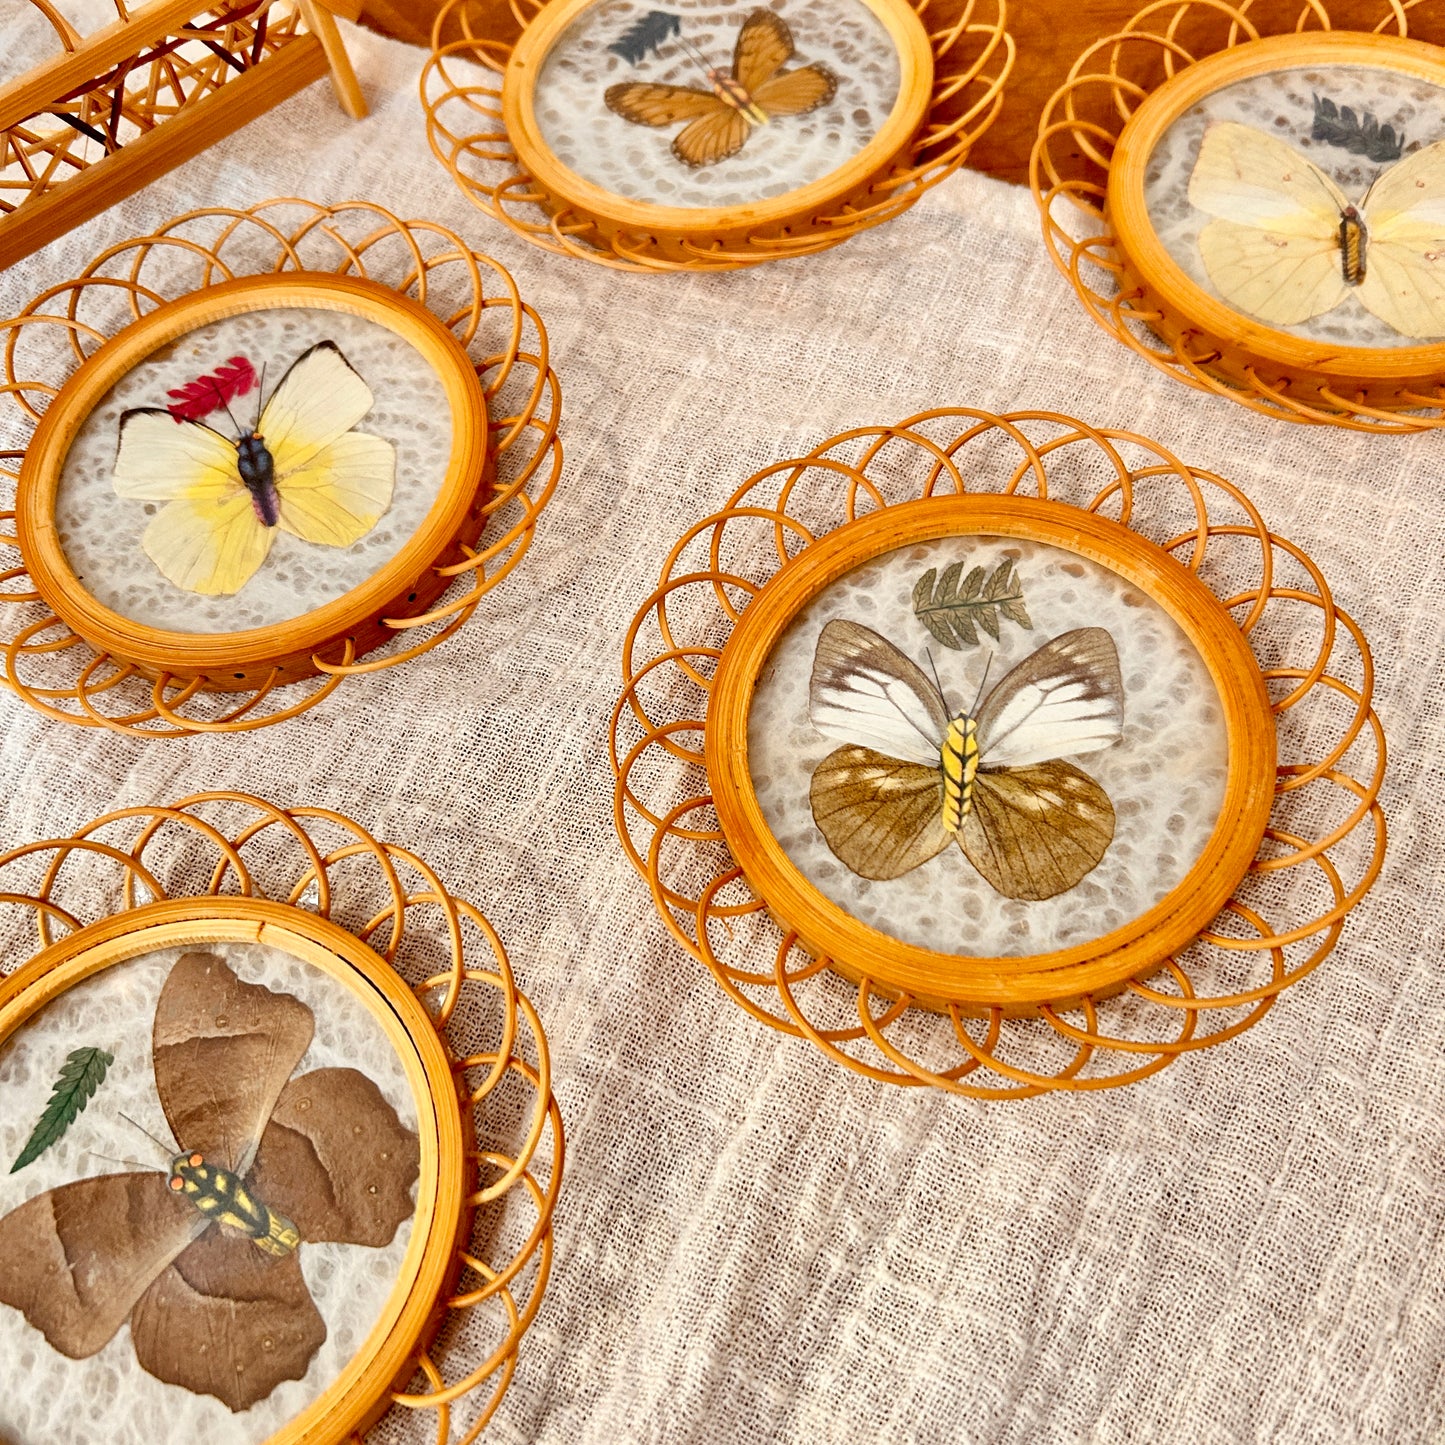 Butterfly coasters